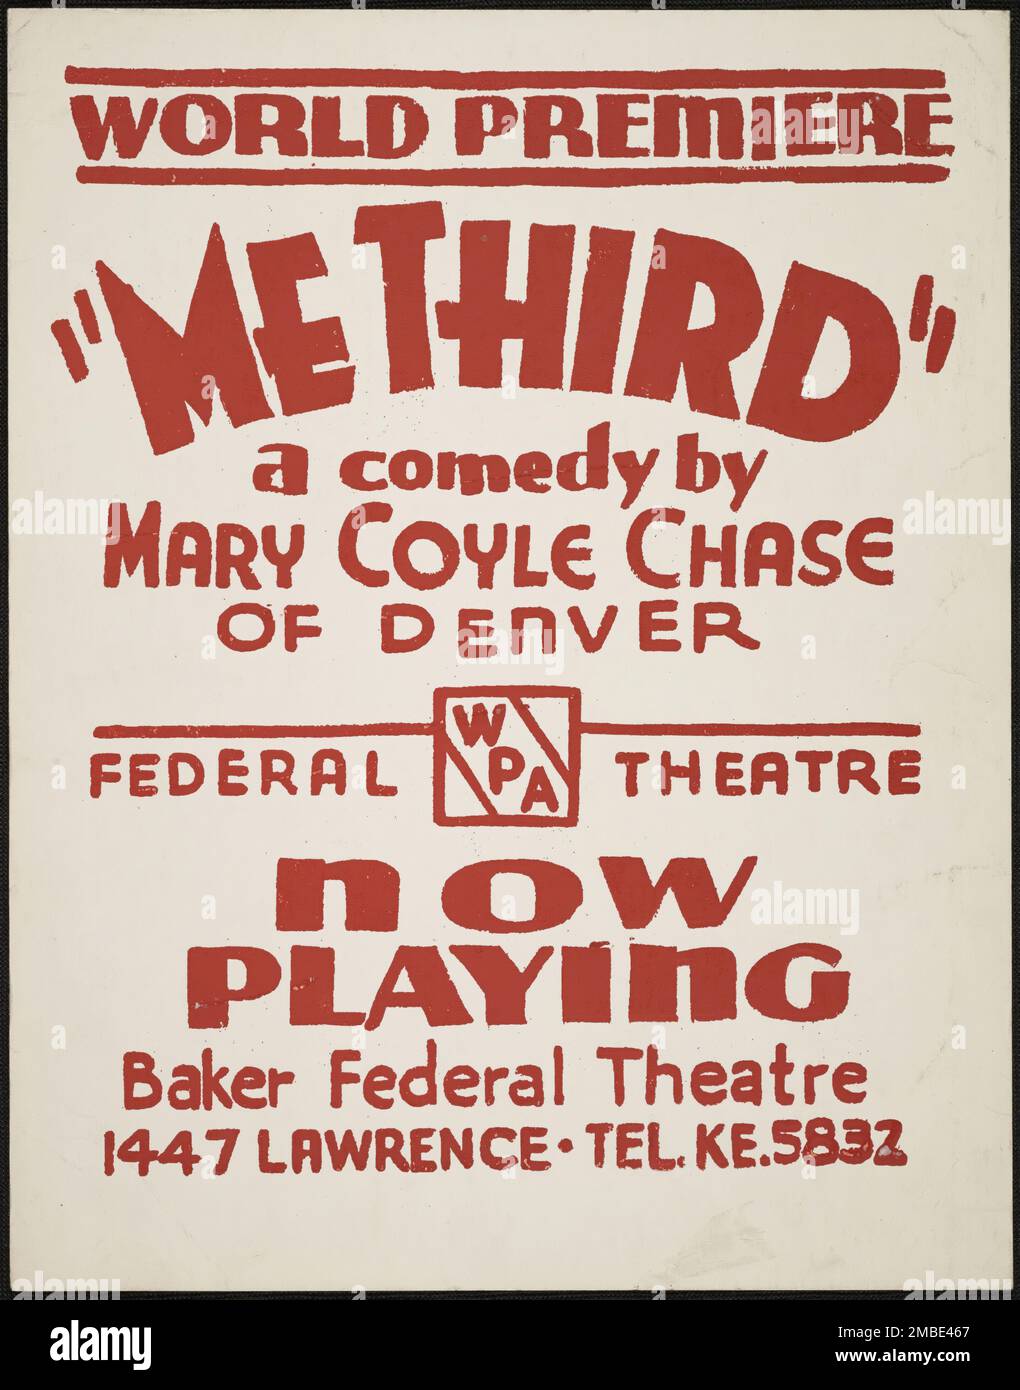 Me Third, Denver, 1936. 'World Premiere - A Comedy by Mary Coyle Chase of Denver...Now Playing - Baker Federal Theatre'. (Coyle wrote the 1944 Broadway play 'Harvey', which was adapted into the 1950 film of the same name). The Federal Theatre Project, created by the U.S. Works Progress Administration in 1935, was designed to conserve and develop the skills of theater workers, re-employ them on public relief, and to bring theater to thousands in the United States who had never before seen live theatrical performances. Stock Photo